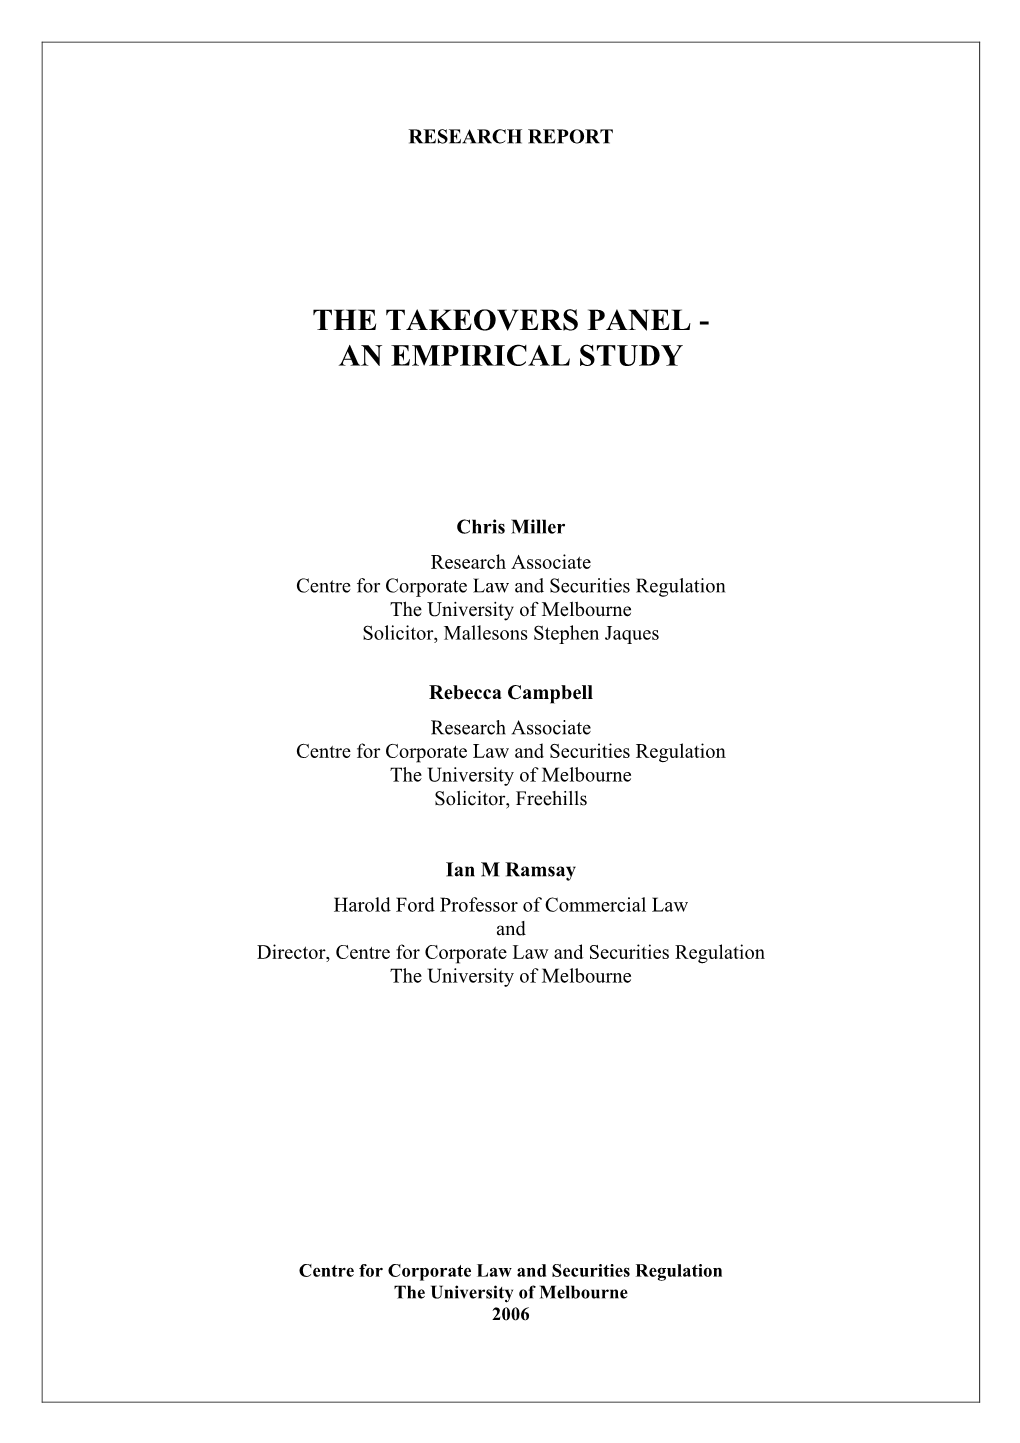 The Takeovers Panel - an Empirical Study